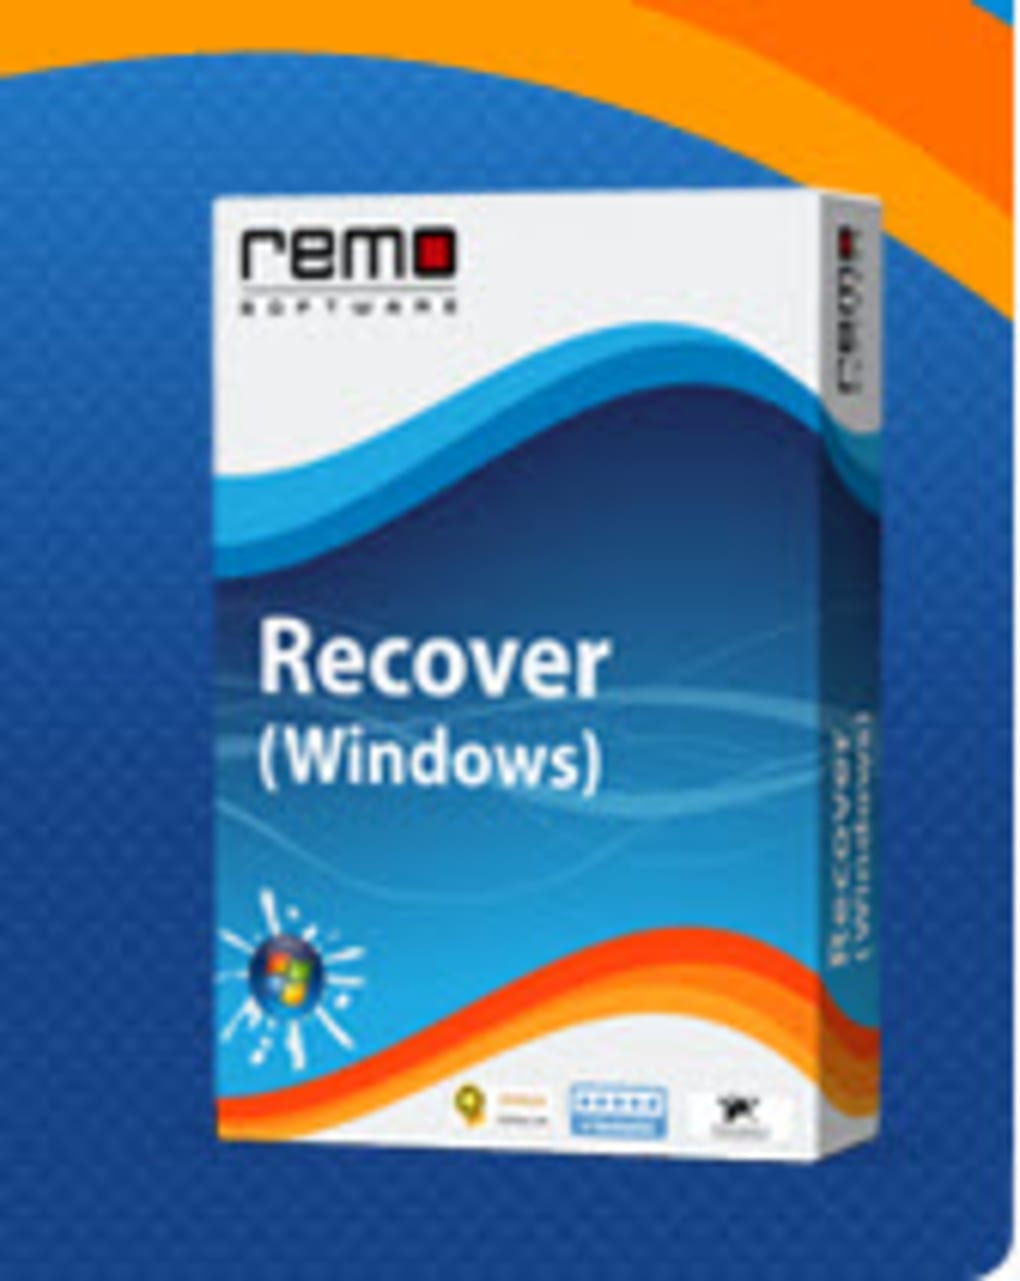 Remo Recover 6.0.0.227 download the new version for windows